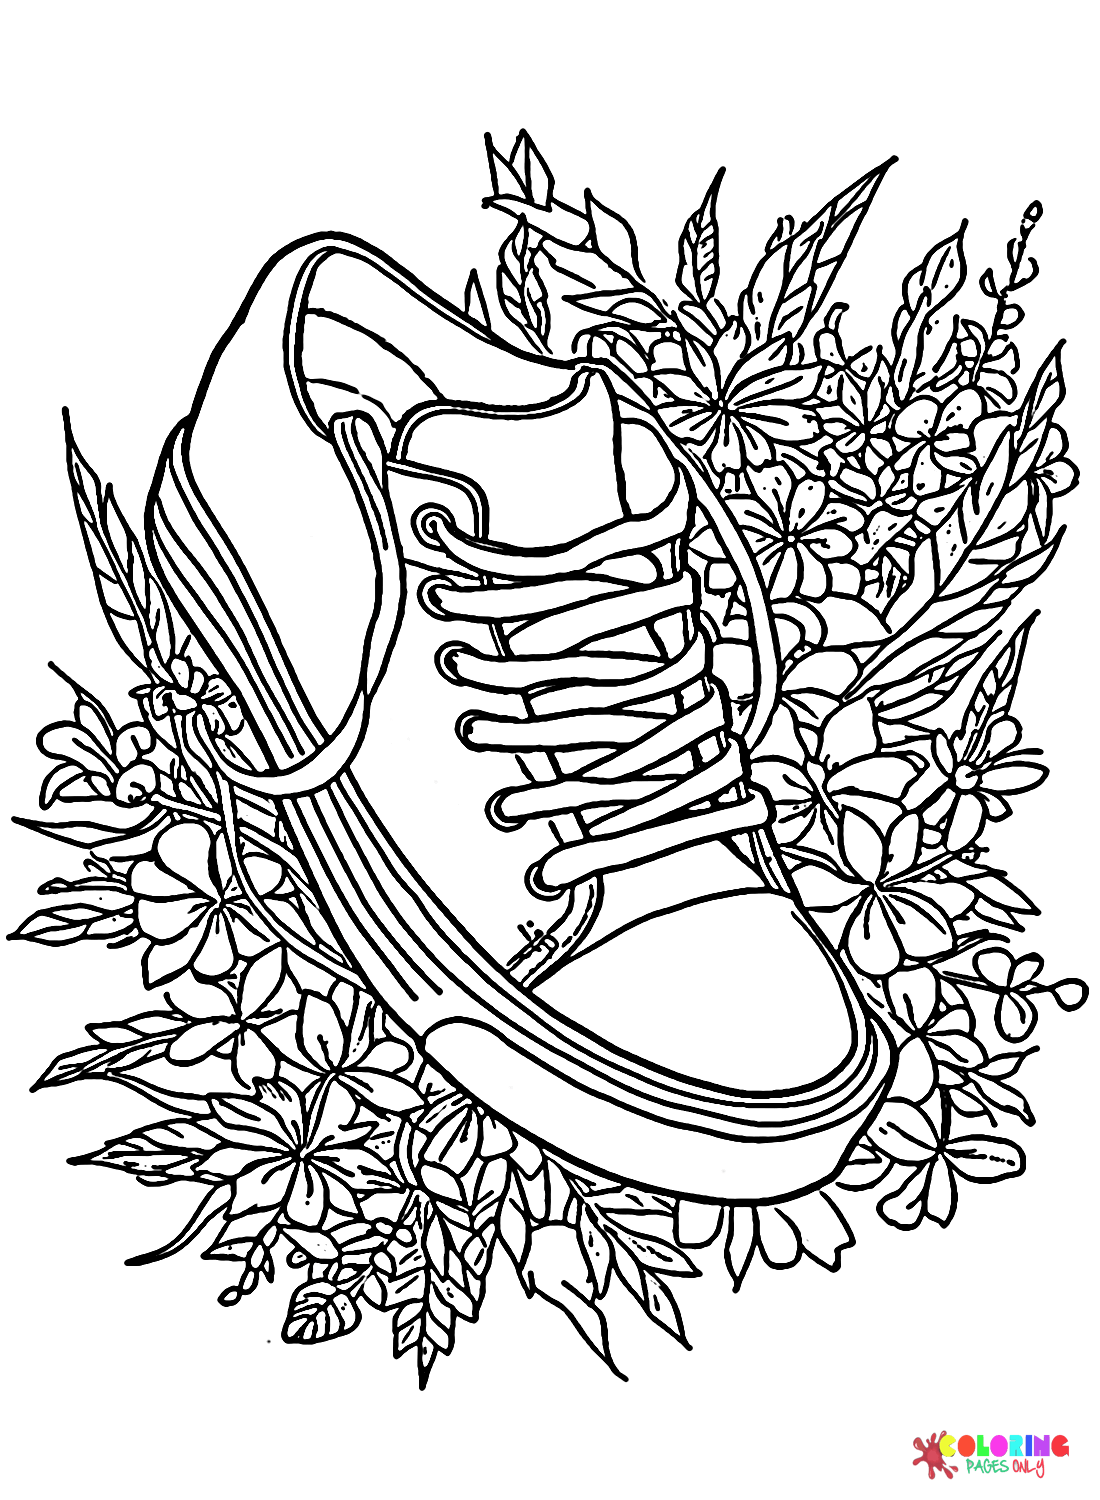 Flowers with Sneaker from Sneaker